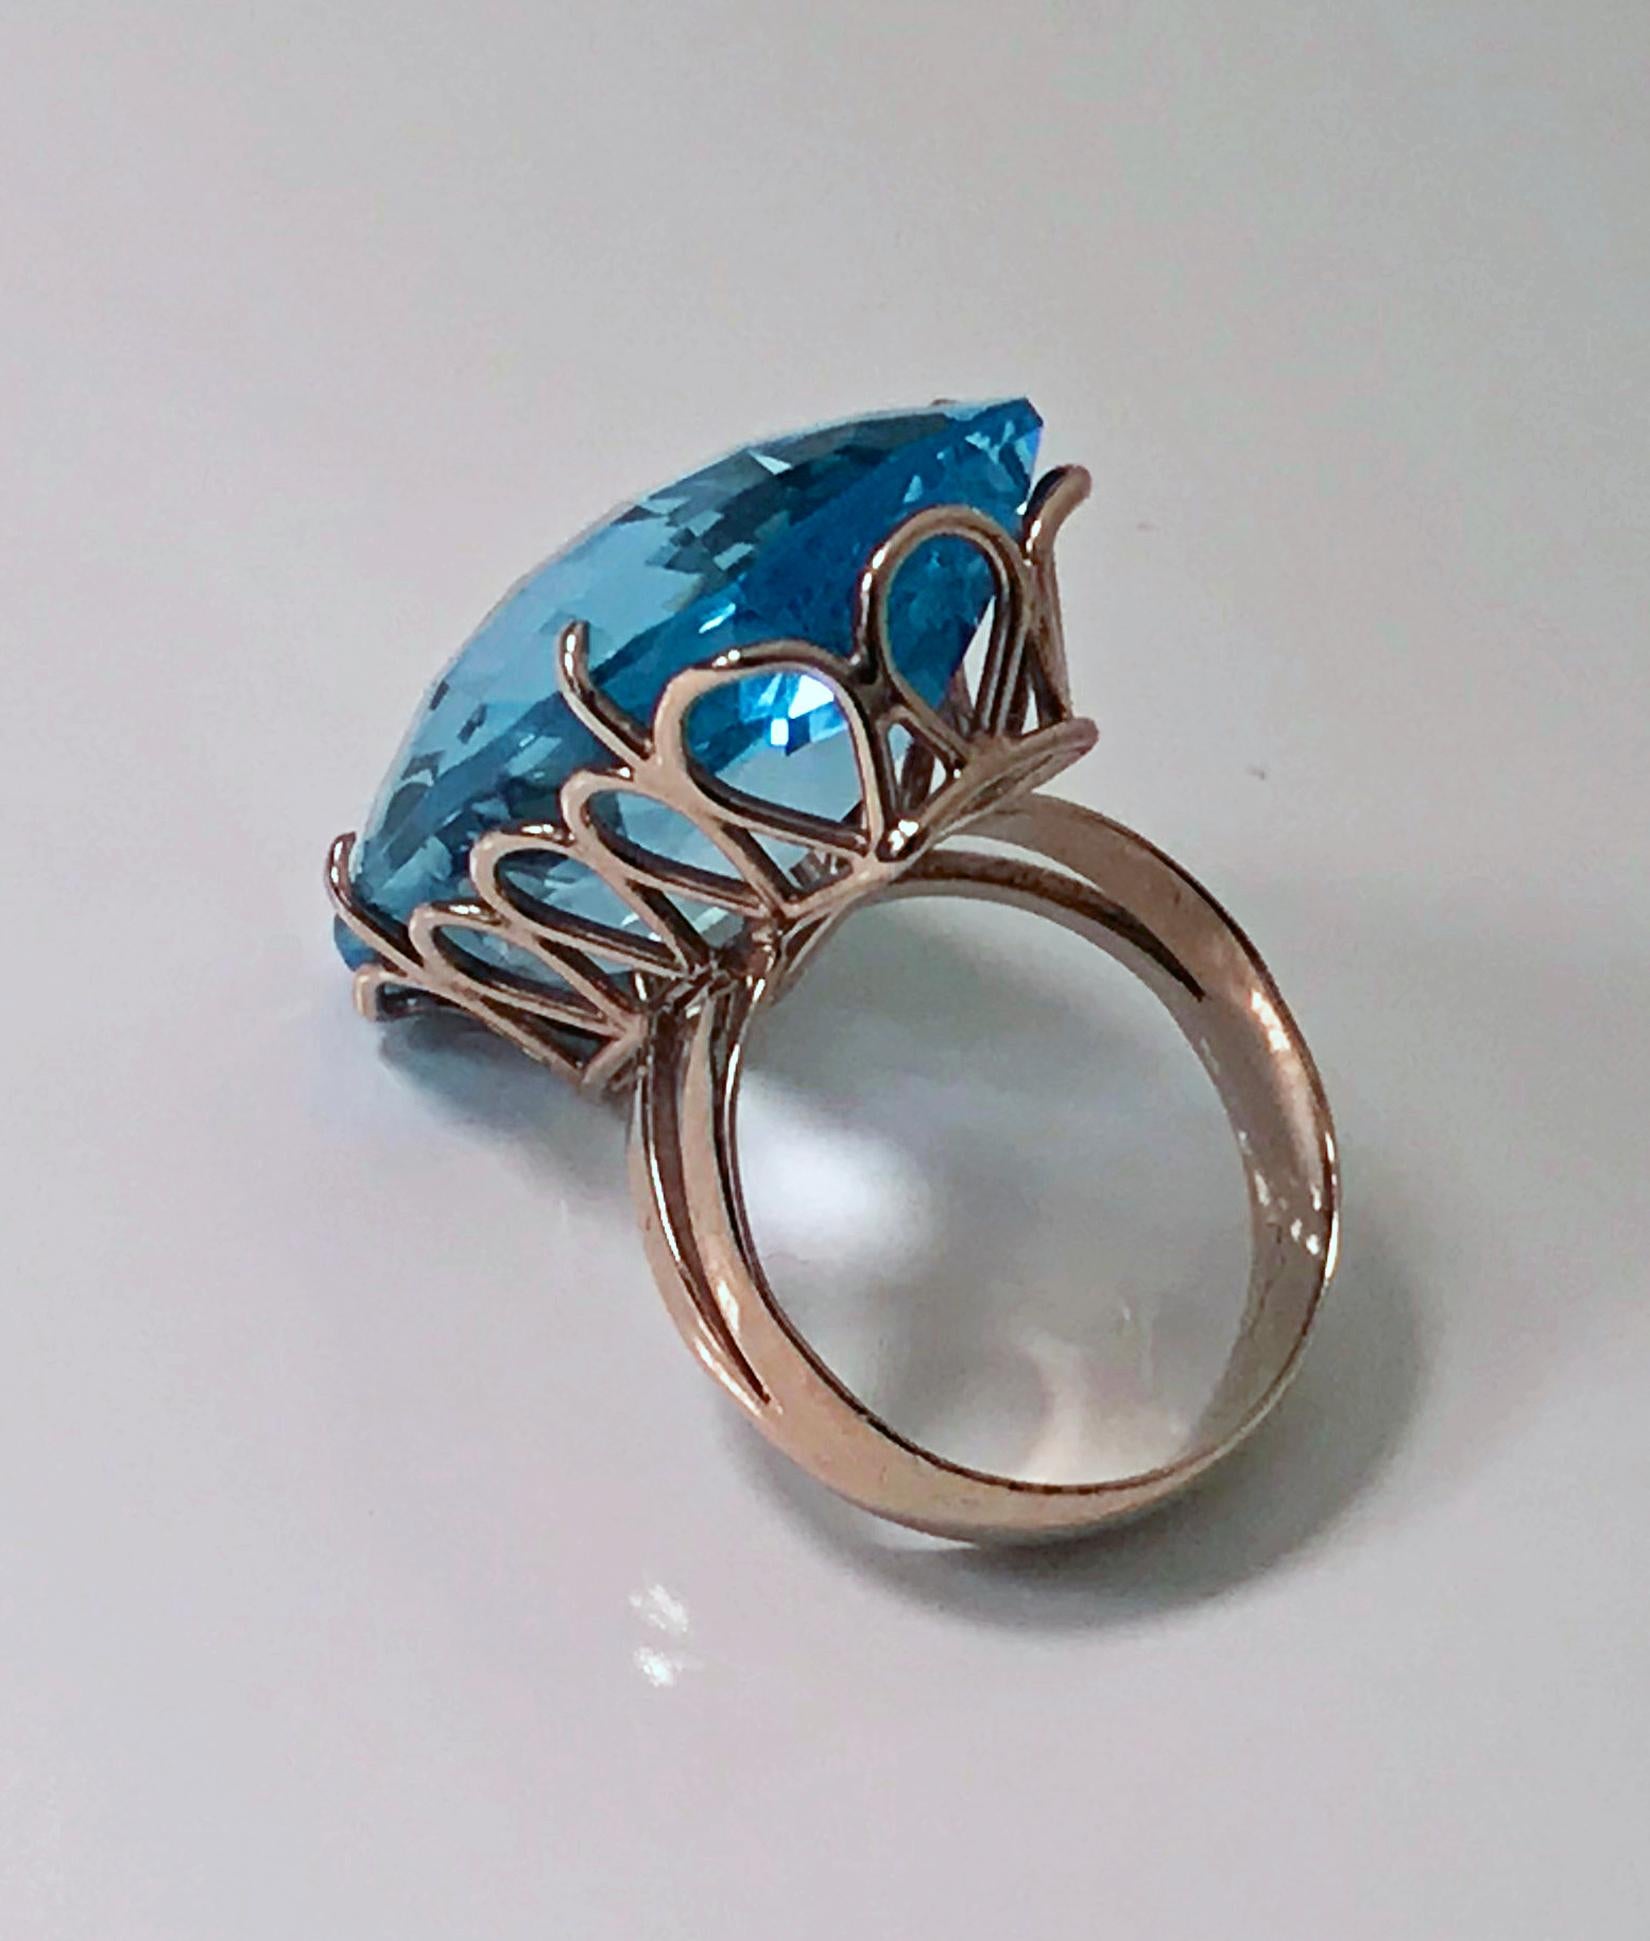 Topaz and Gold custom Ring C.1970. The 14K rose gold ring set with a large cushion oval shape medium dark, strong intensity blue topaz, gauging 35.00 x 14.80 x 10.00 mm, approximately 53.57 cts, VVS clarity, good cut. The mount of a custom tear drop